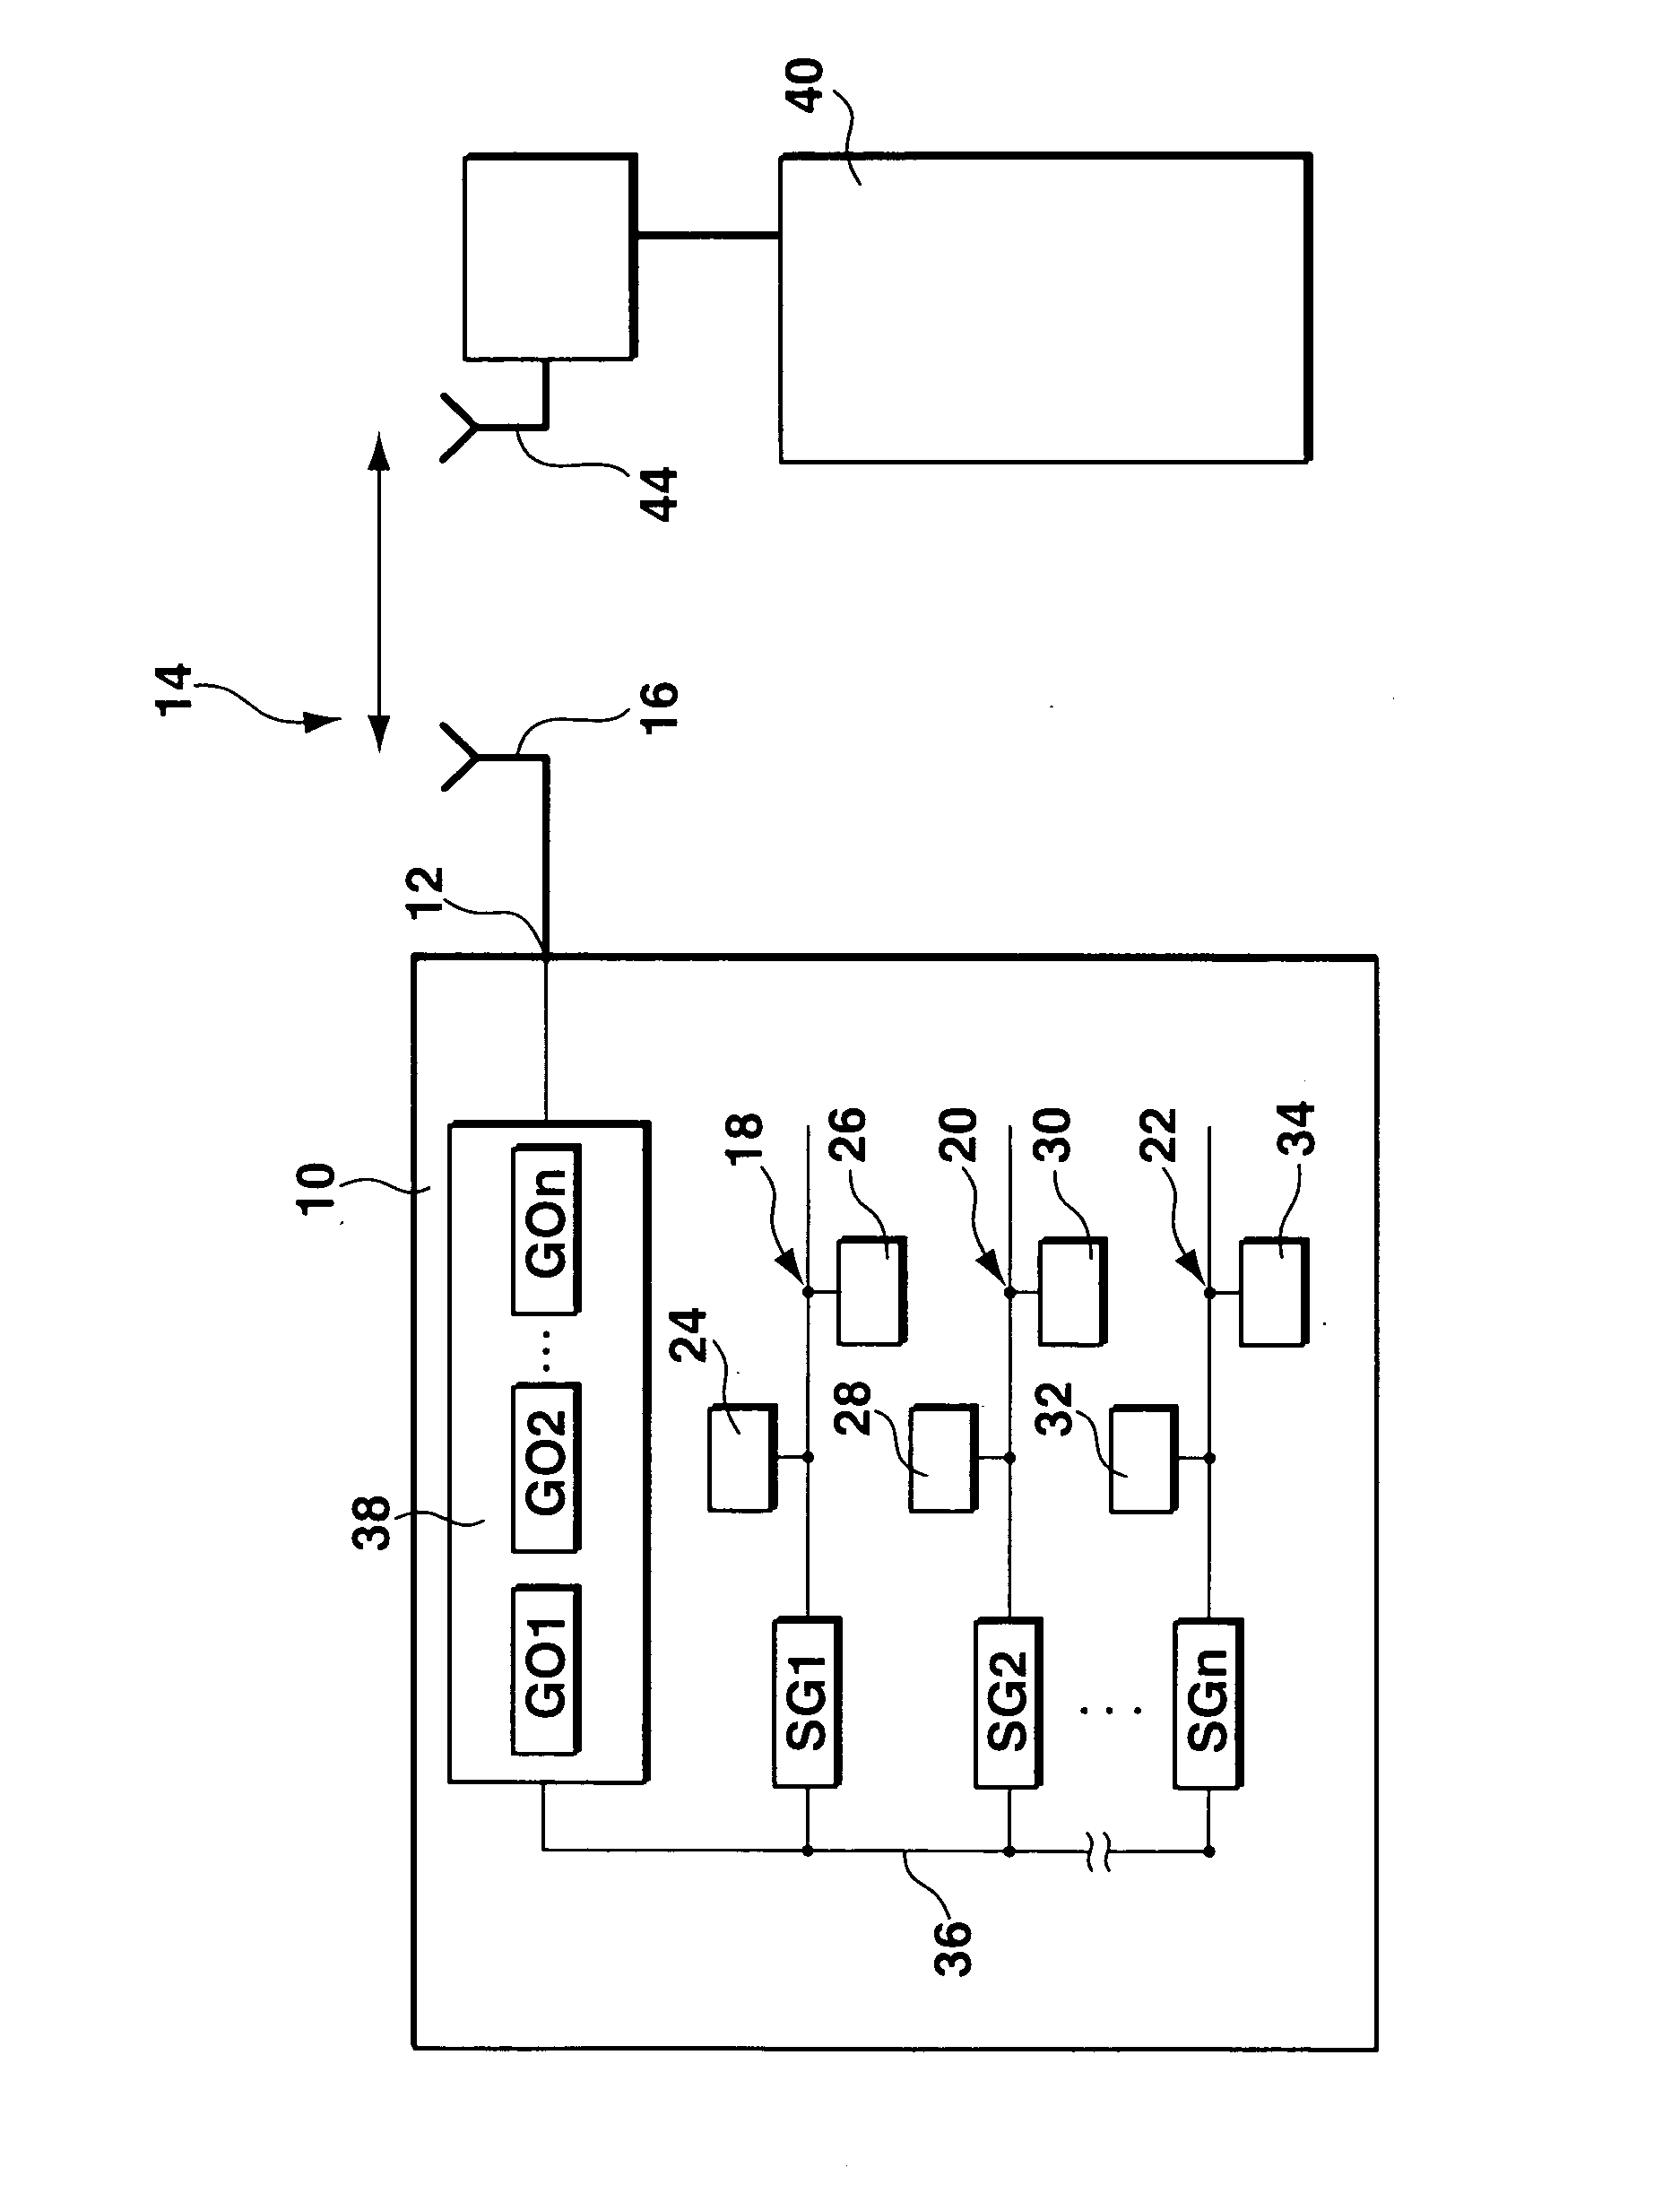 Device for access to at least one component of a networked system from outside or from at least one component of such a system outward